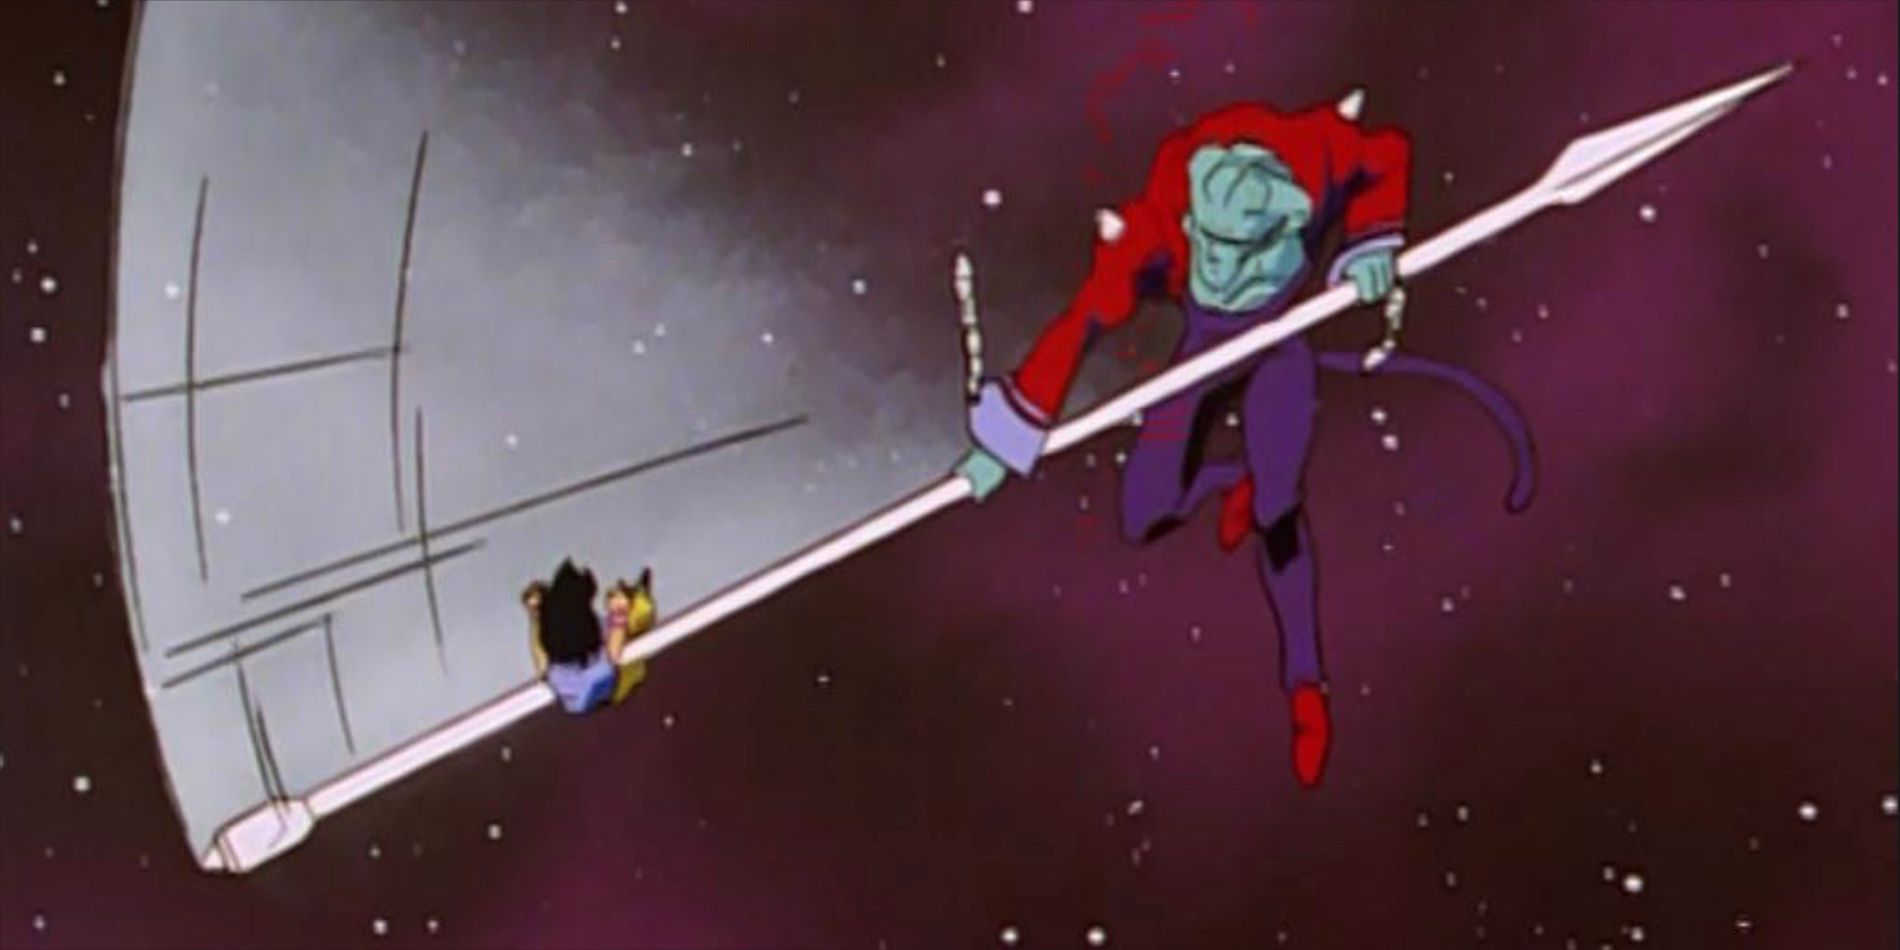 Ledgic swings a saber at Goku in combat in Dragon Ball GT.